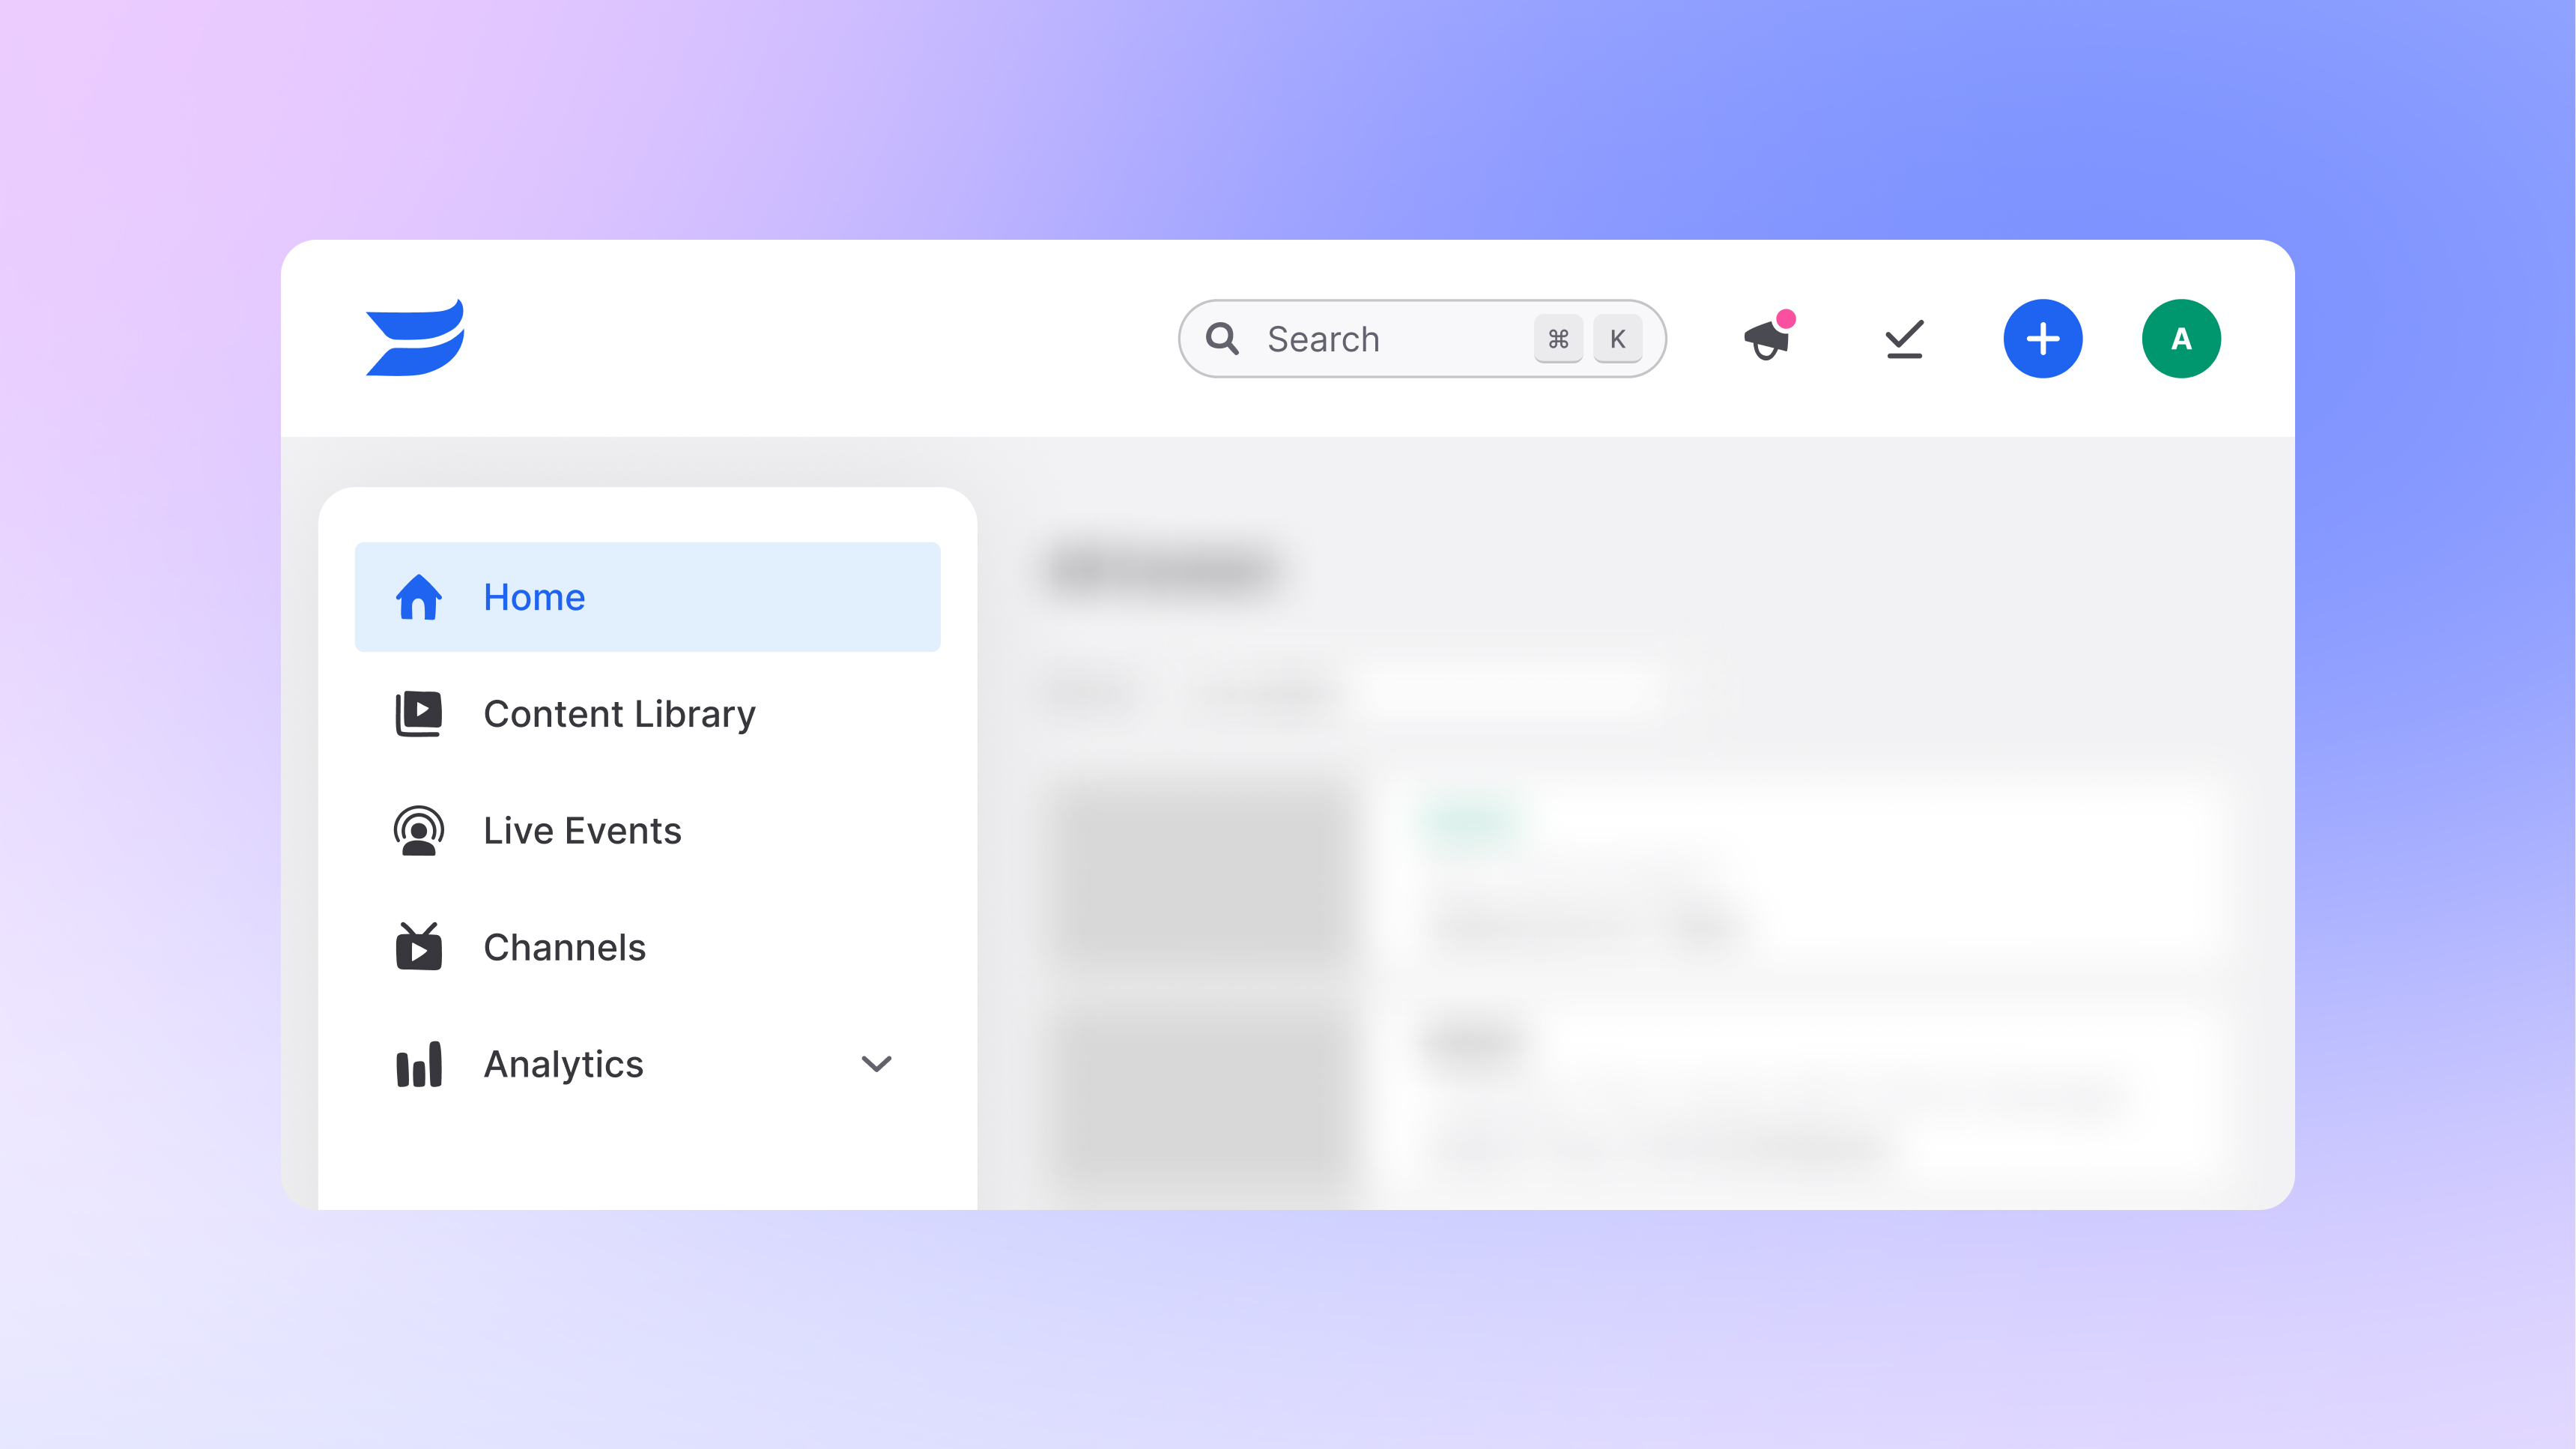 wistia's updated app navigation featuring links to home, content library, live events, channels, and analytics